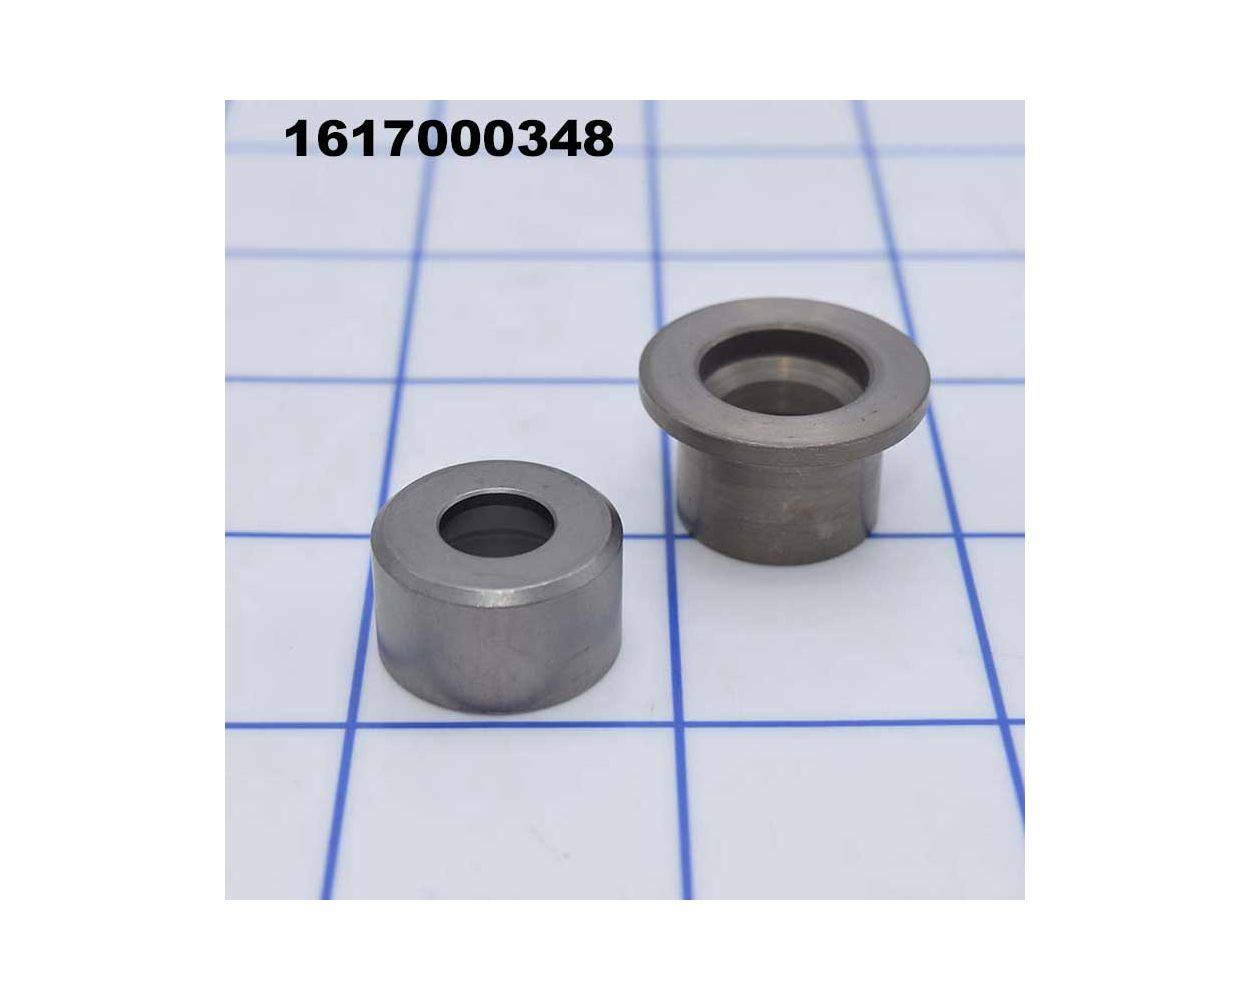 Bosch Parts 1617000348 Guide Bushing Assembly 